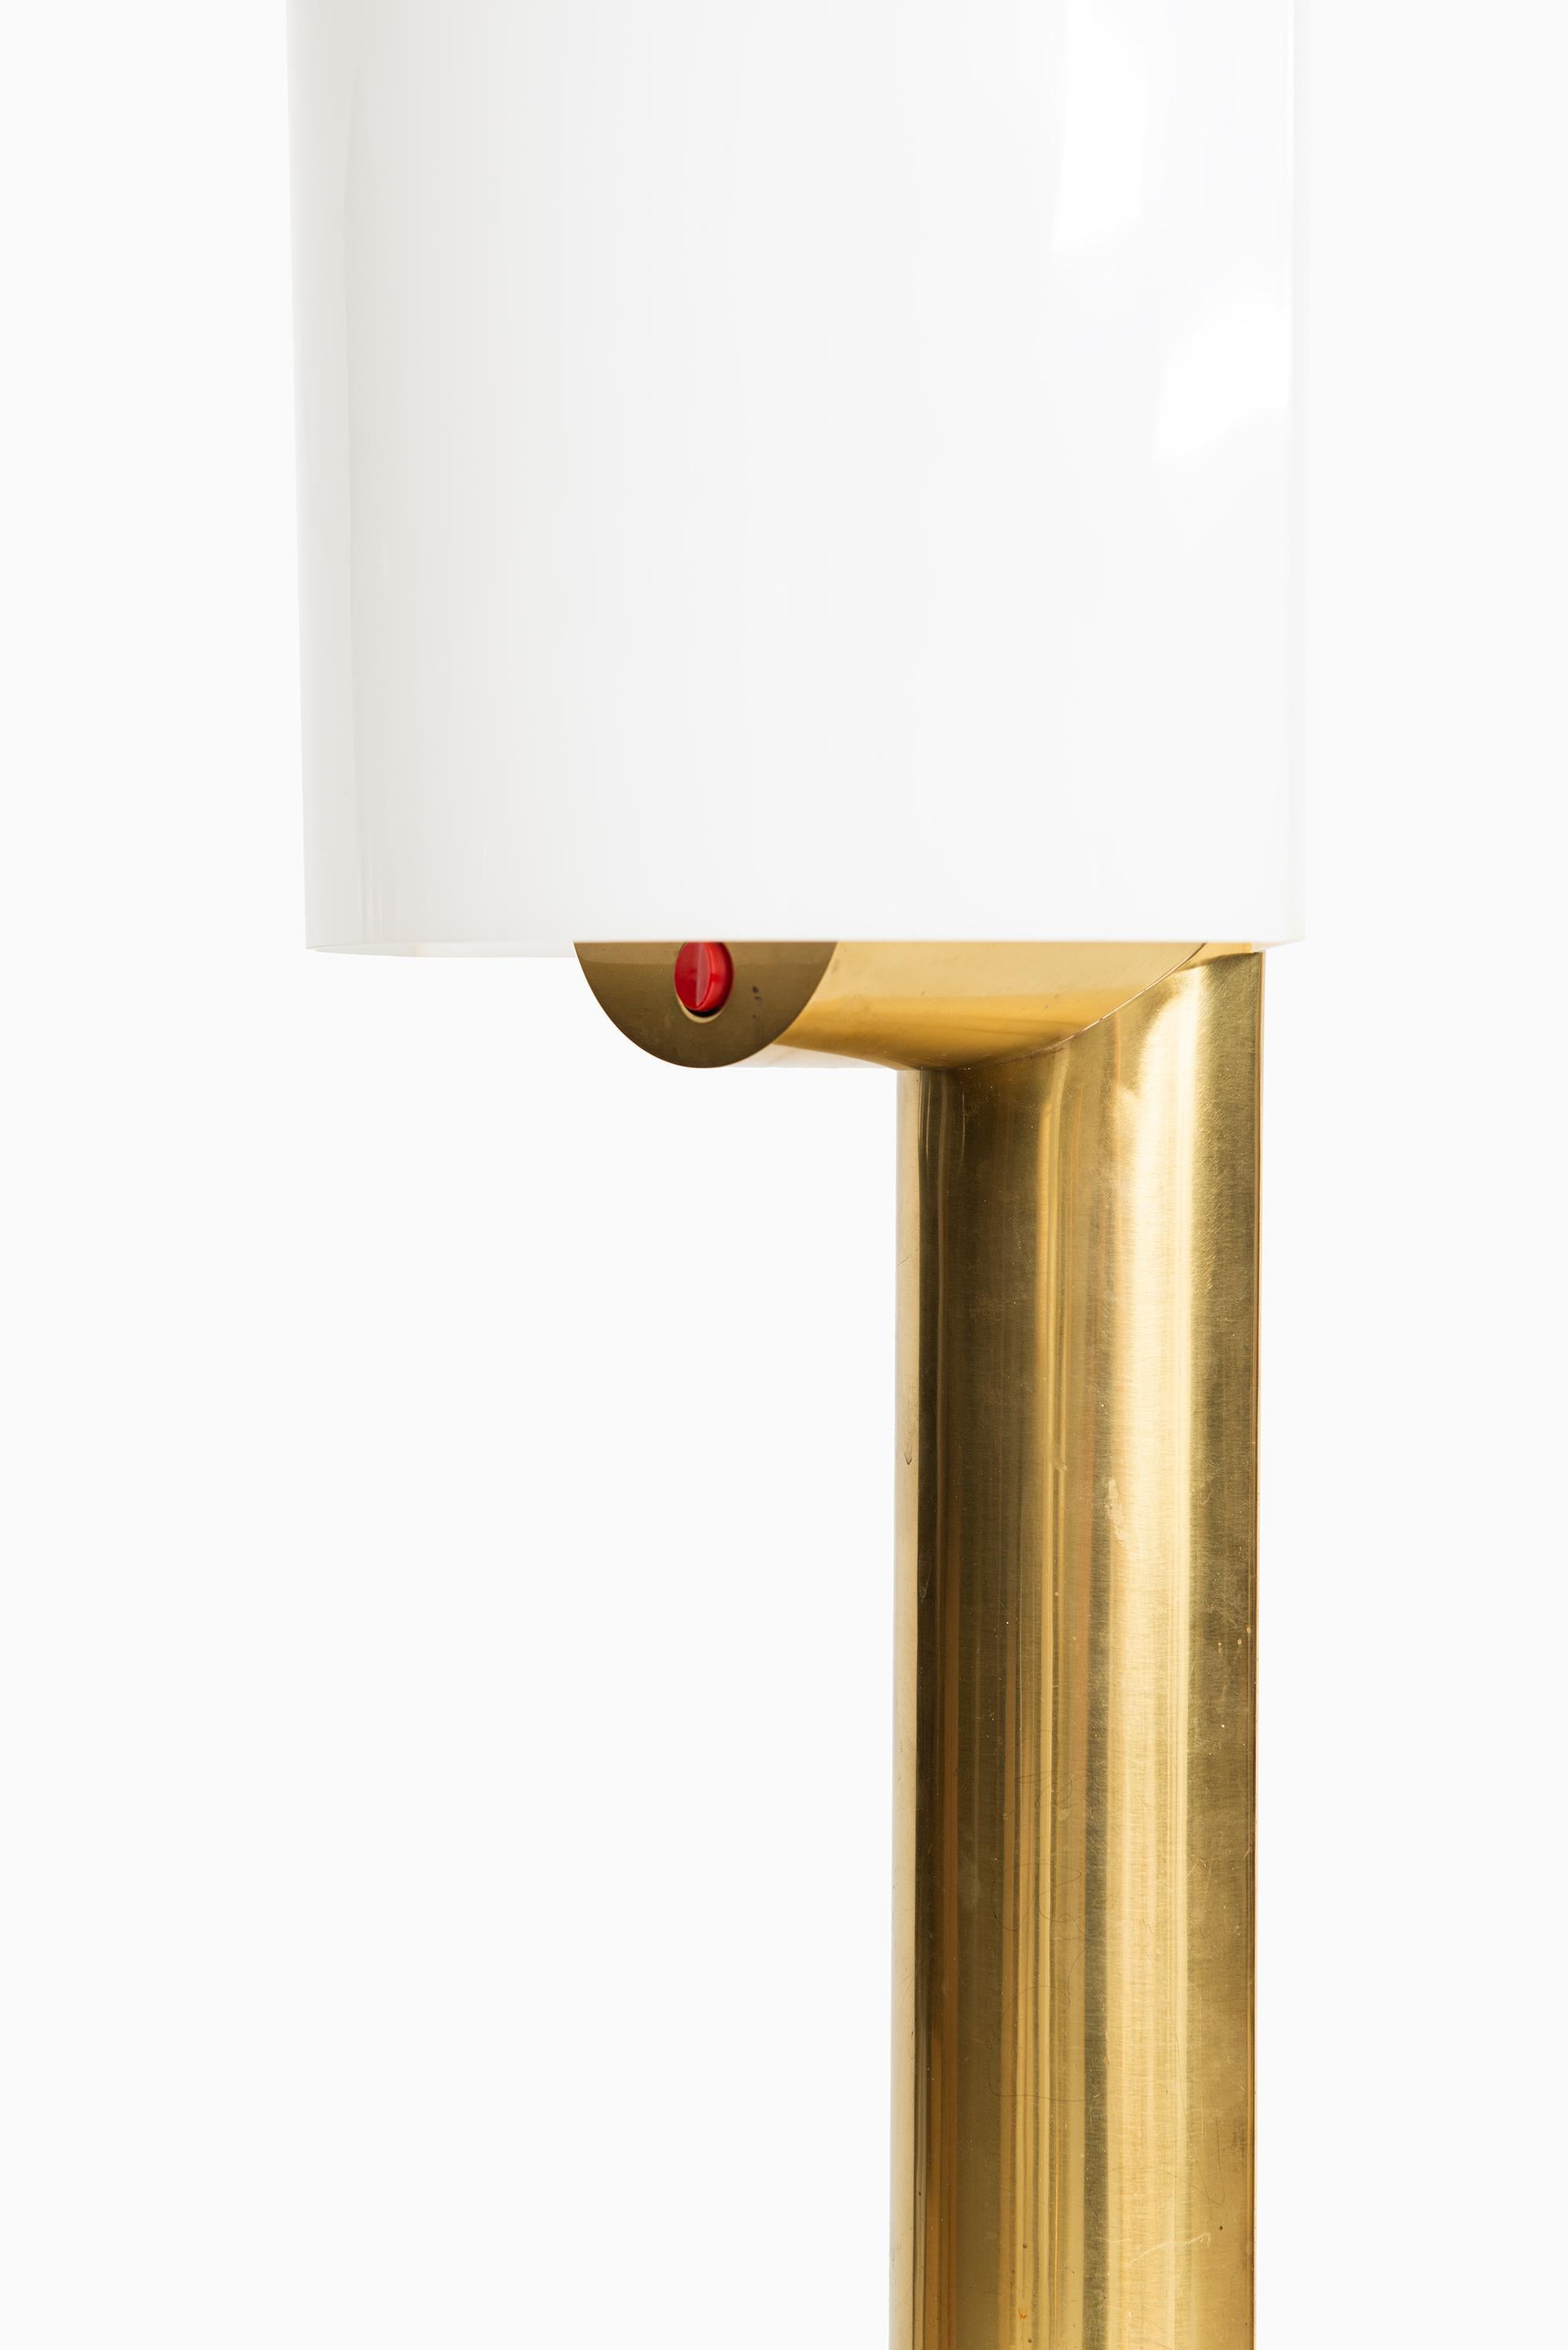 Scandinavian Modern Reima Pietilä Table Lamps Produced for Public Library Metso in Tampere, Finland For Sale